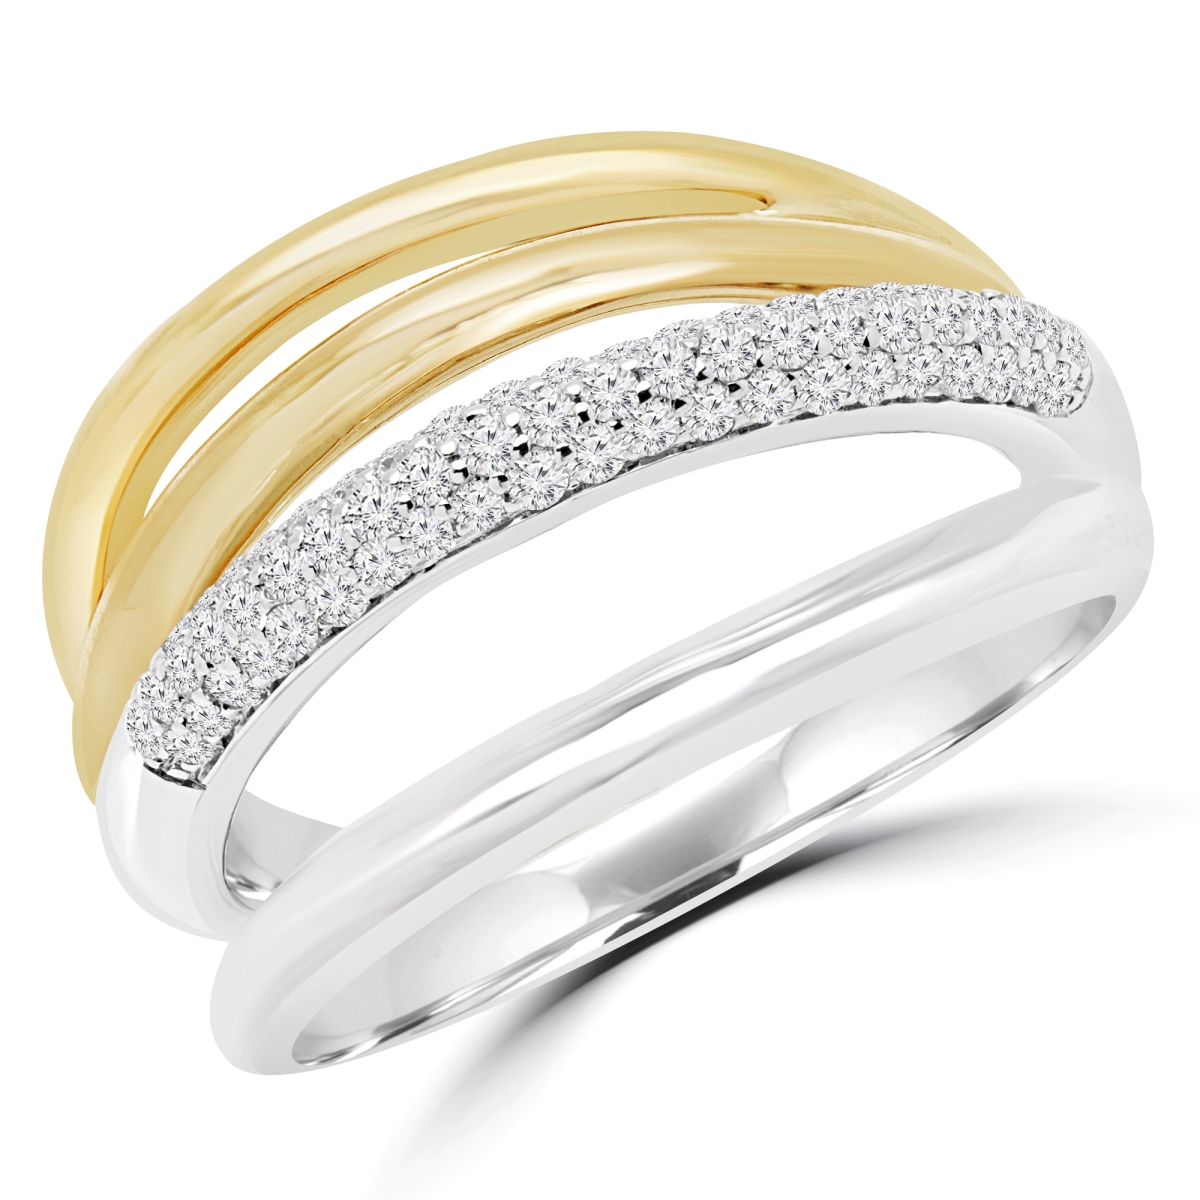 Picture of Majesty Diamonds MDR170050-8.75 0.37 CTW Round Diamond Cocktail Semi-Eternity Ring in 14K Two-Tone Gold - 8.75